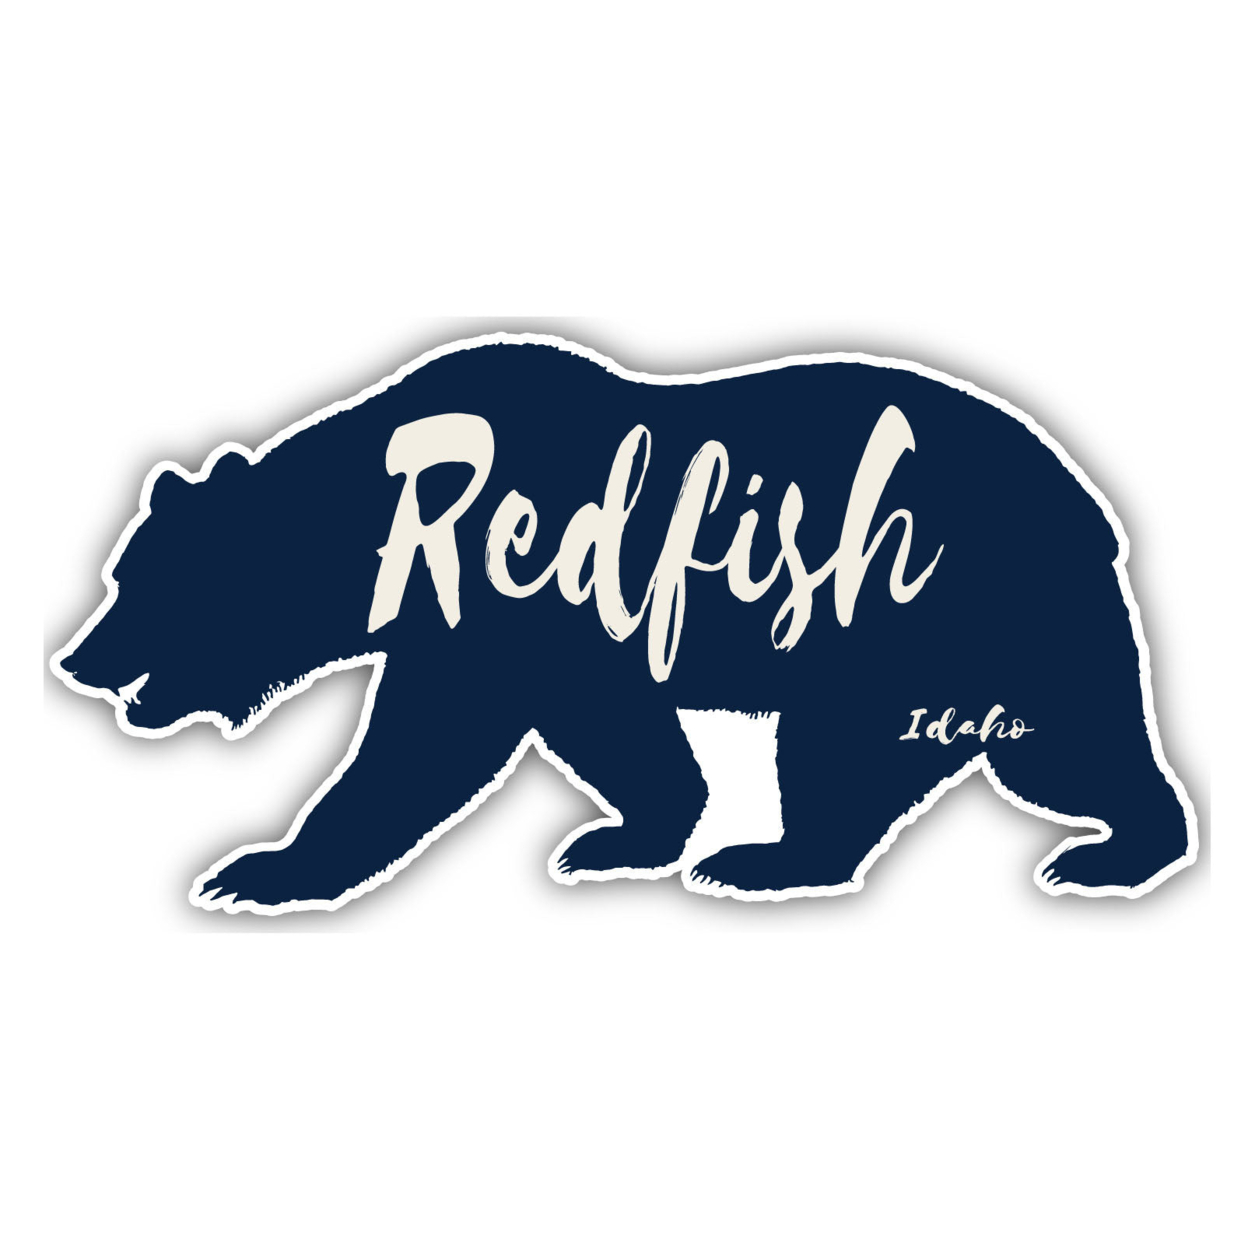 Redfish Idaho Souvenir Decorative Stickers (Choose Theme And Size) - Single Unit, 4-Inch, Great Outdoors